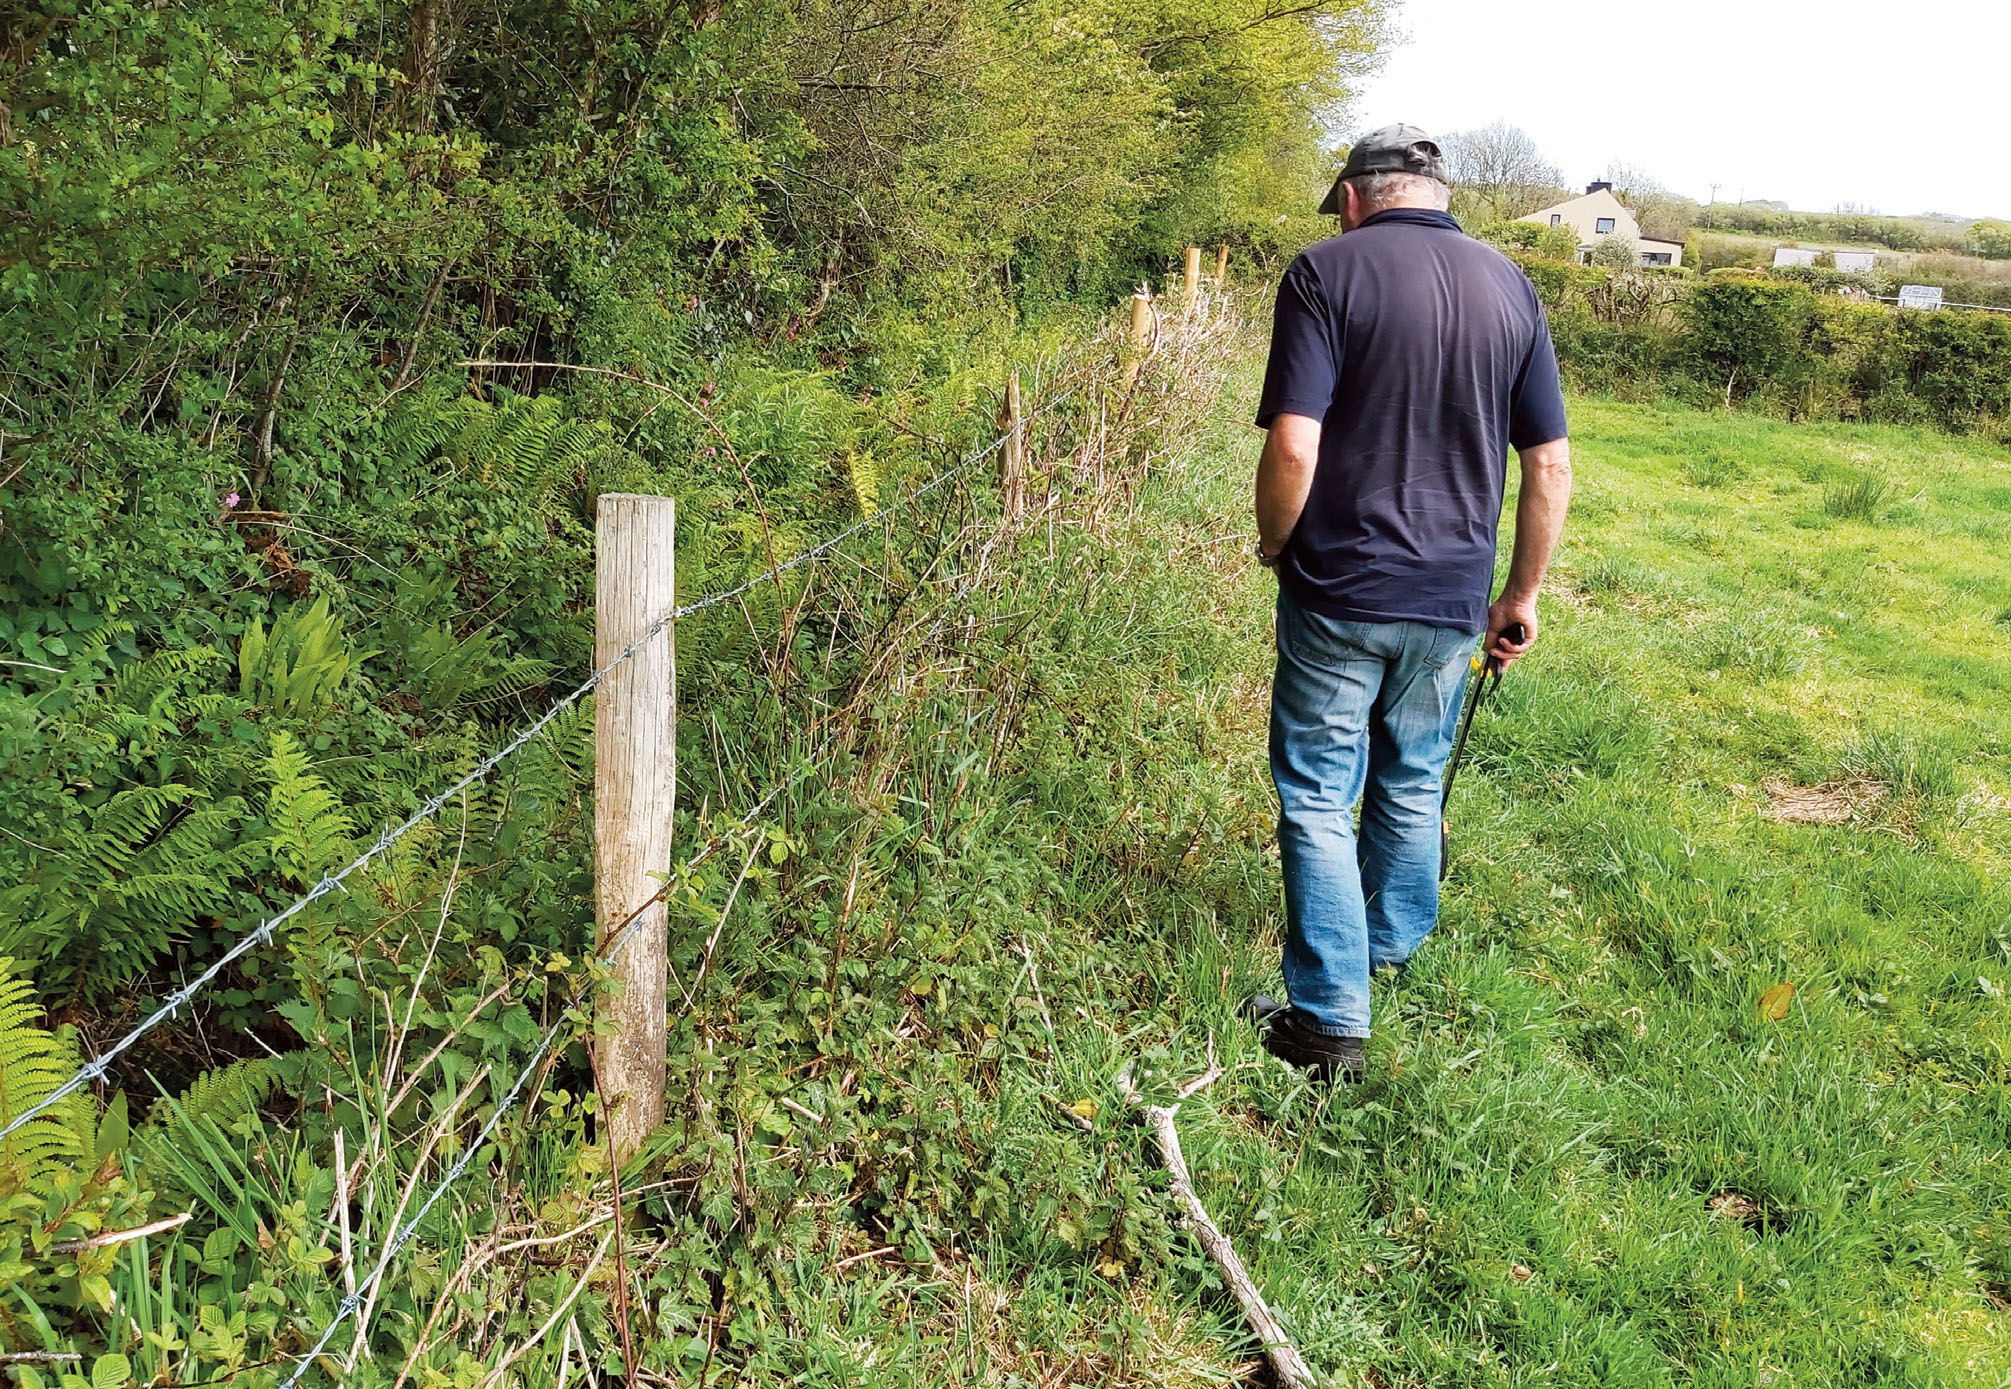 Landowner monitoring a ditch for Himalayan balsam in the upper reaches of the Castlemartin Corse catchment, Pembrokeshire, Wales, UK